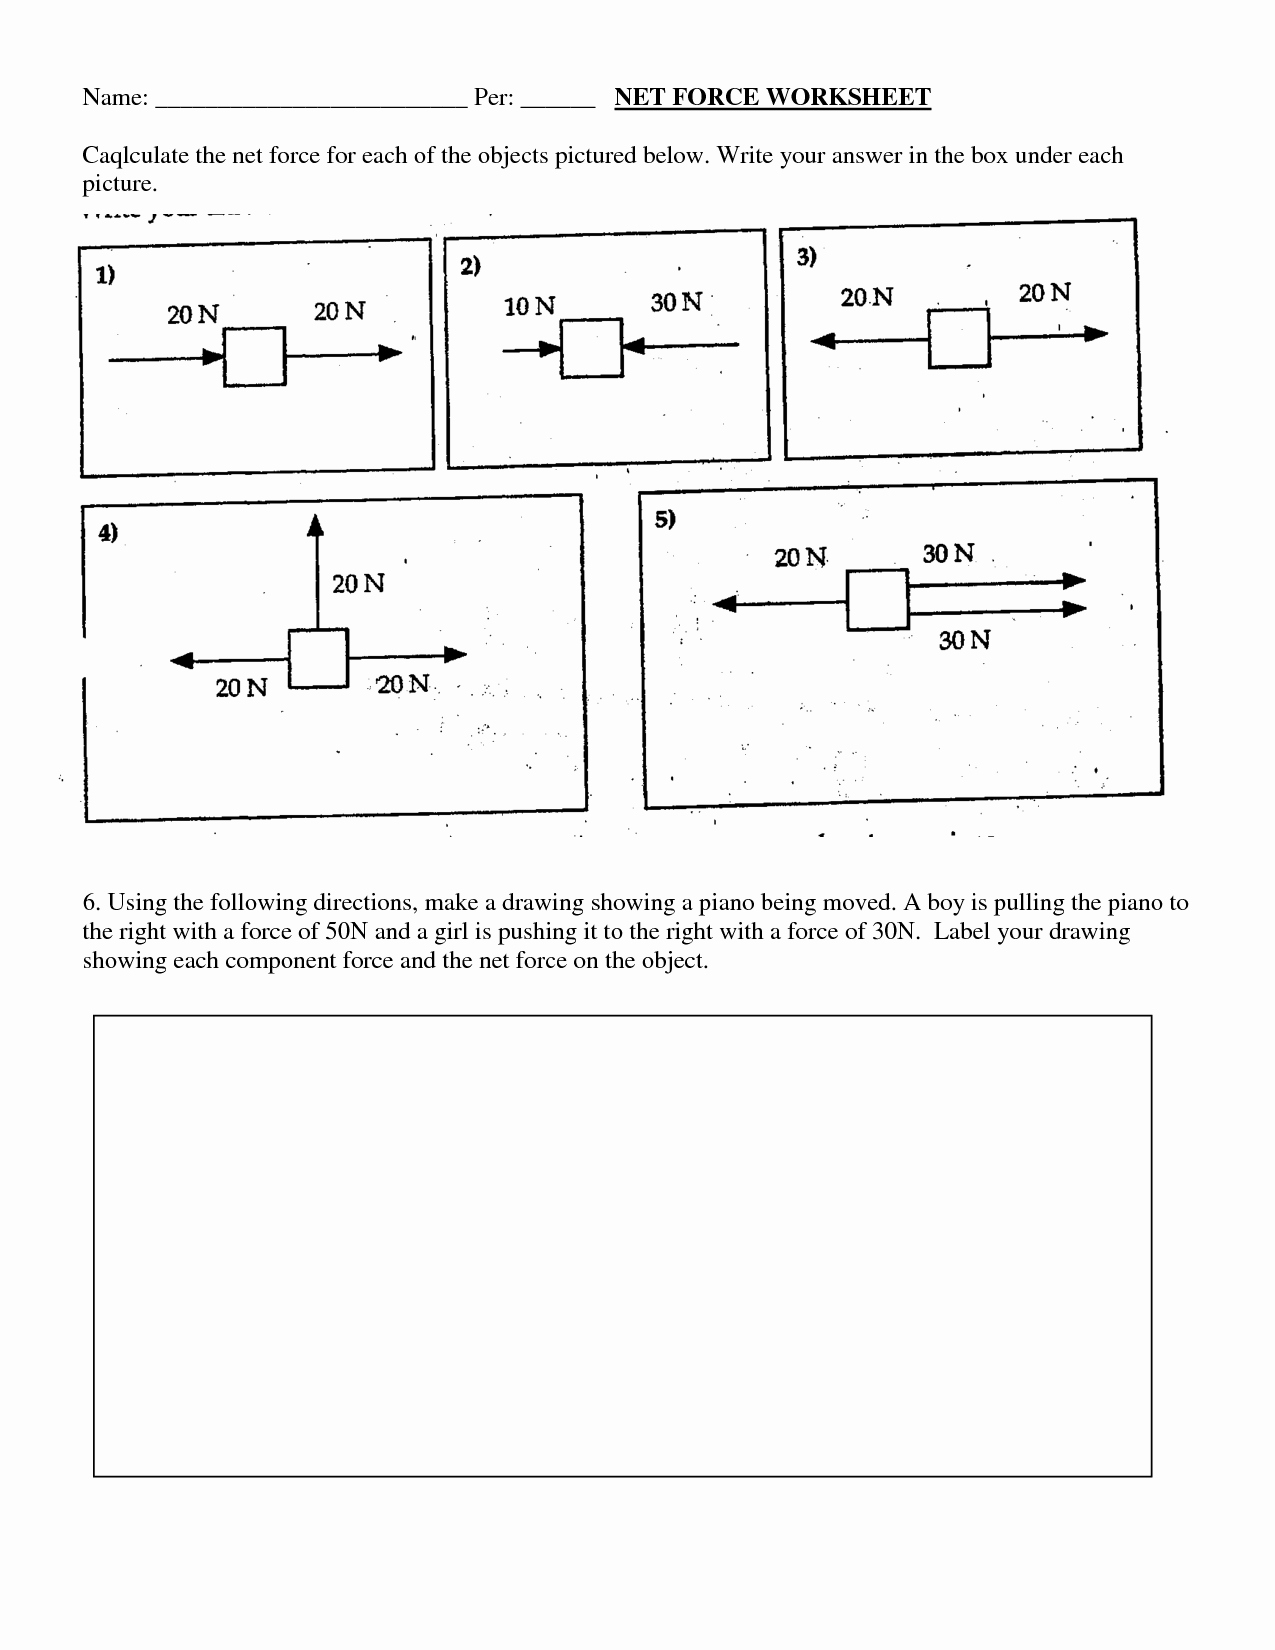 Net force Worksheet Answers Beautiful 13 Best Of force Diagrams Worksheets with Answers